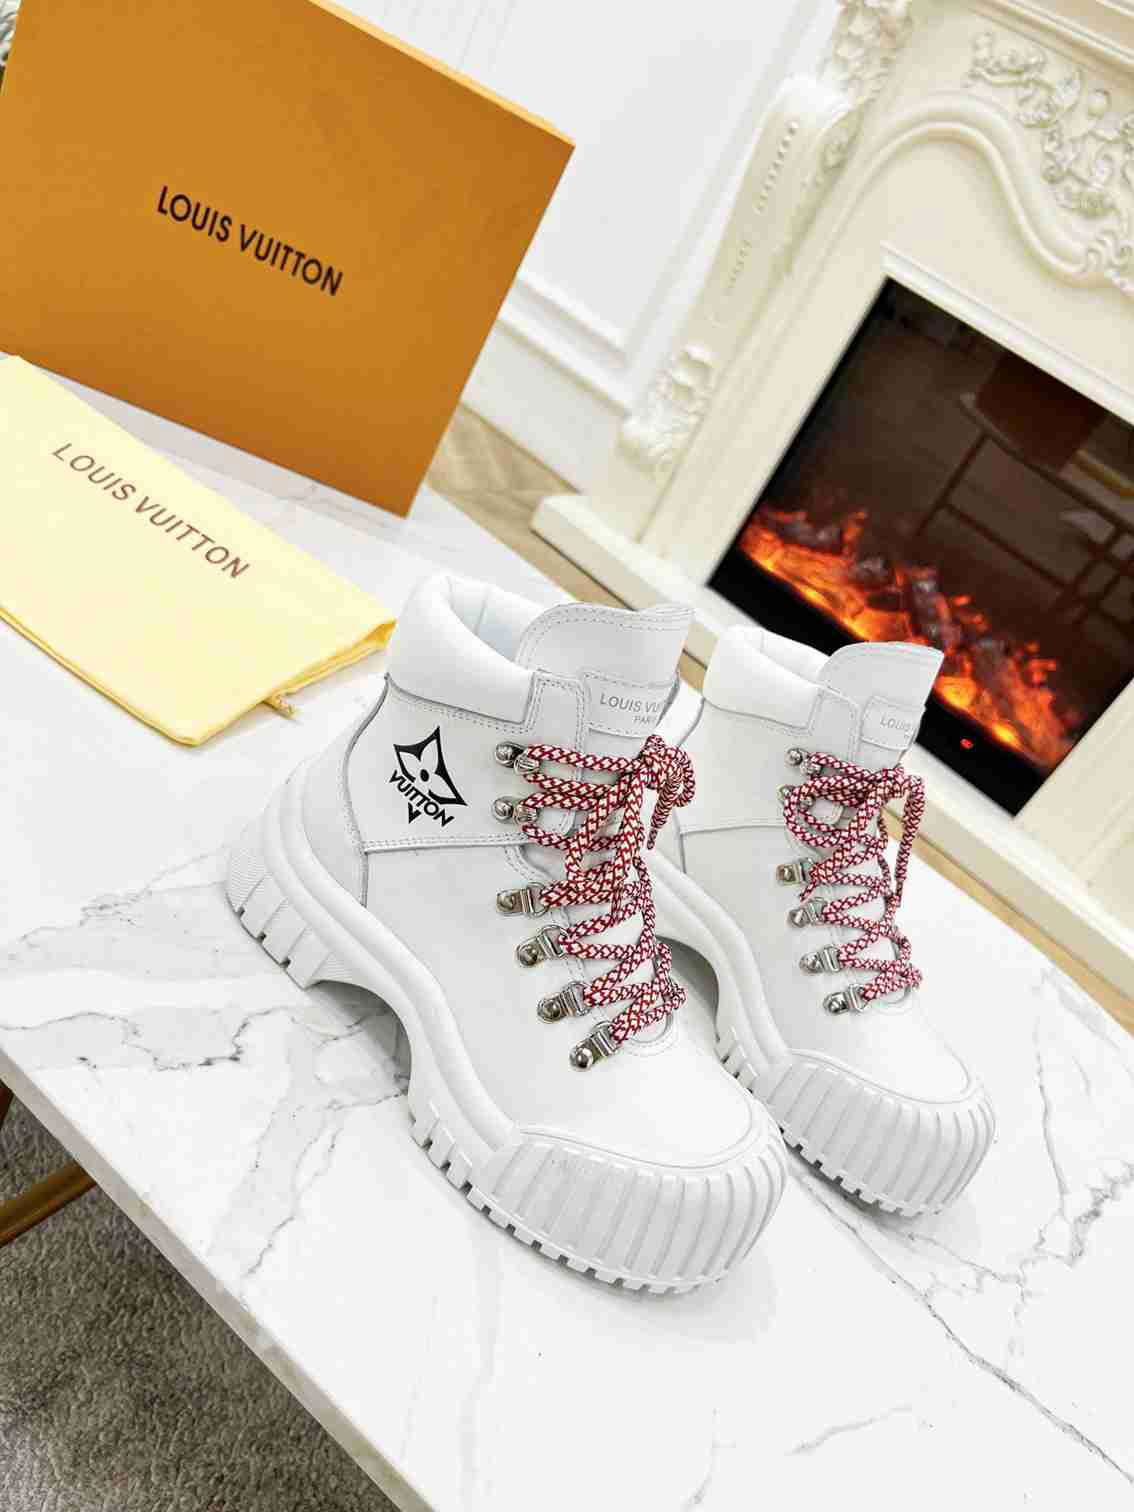               RUBY FLAT RANGER White     alf leather shoes lace up sneaker boots